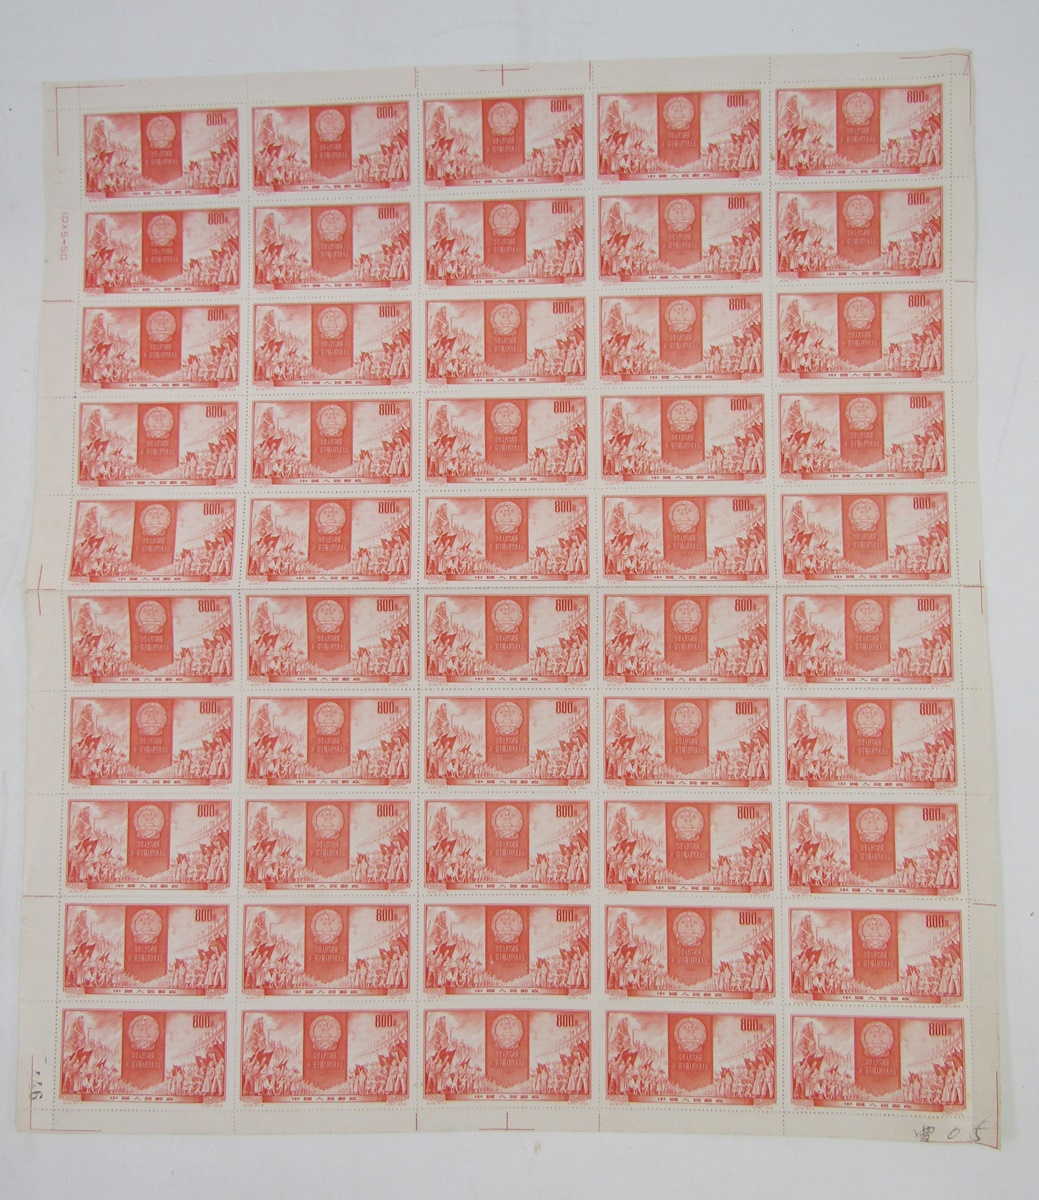 Stamps of People’s Republic of China: Complete unused sheet (50) of $800 Vermillion, 1st Session